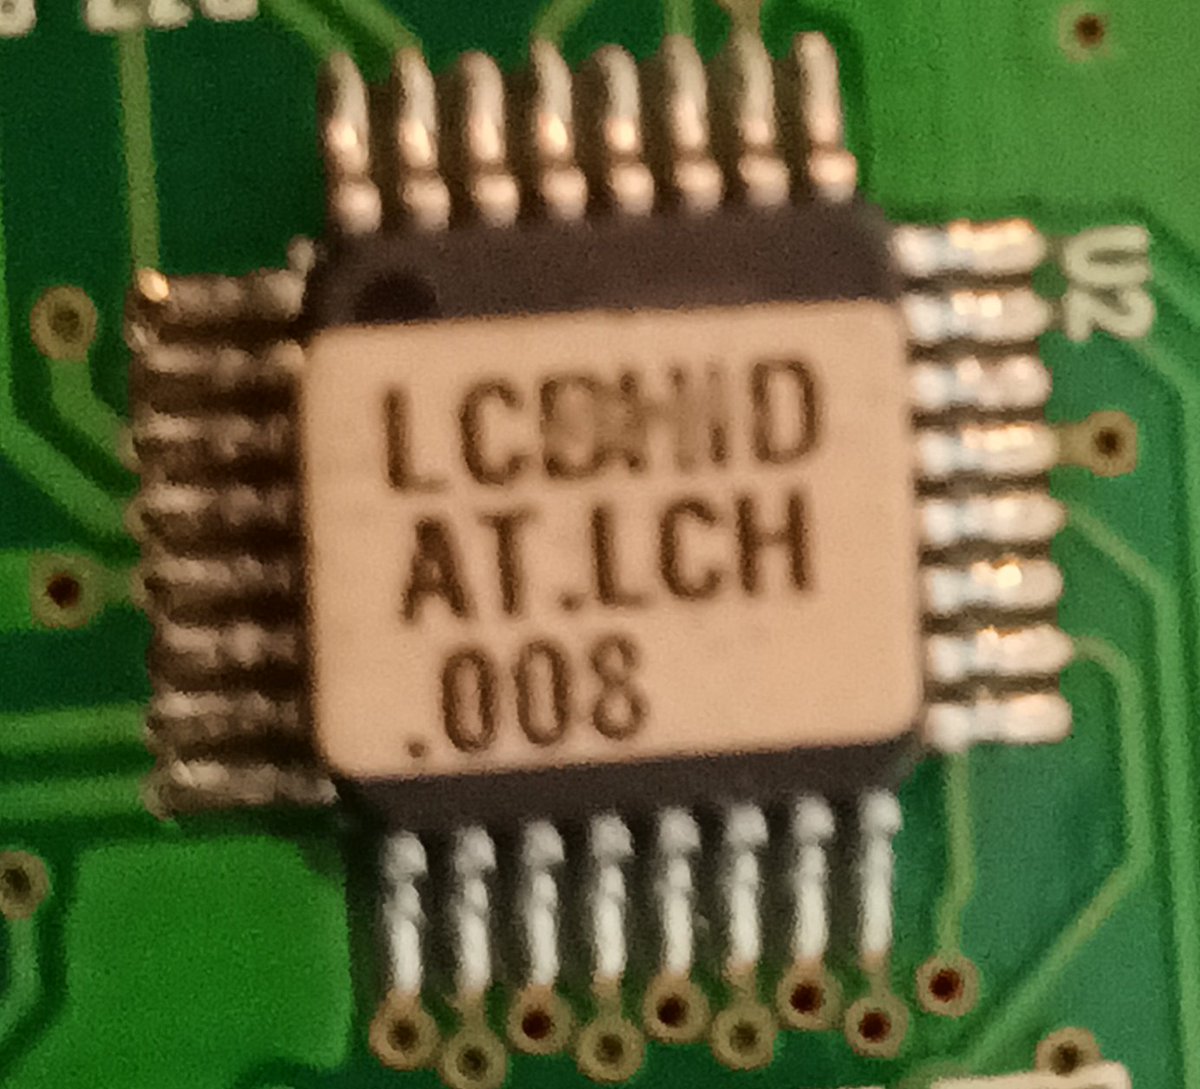 So there's two chips in it.The first one says LCDHID 8CY. LC H.002 And the other one is LCDHID AT.LCH .008